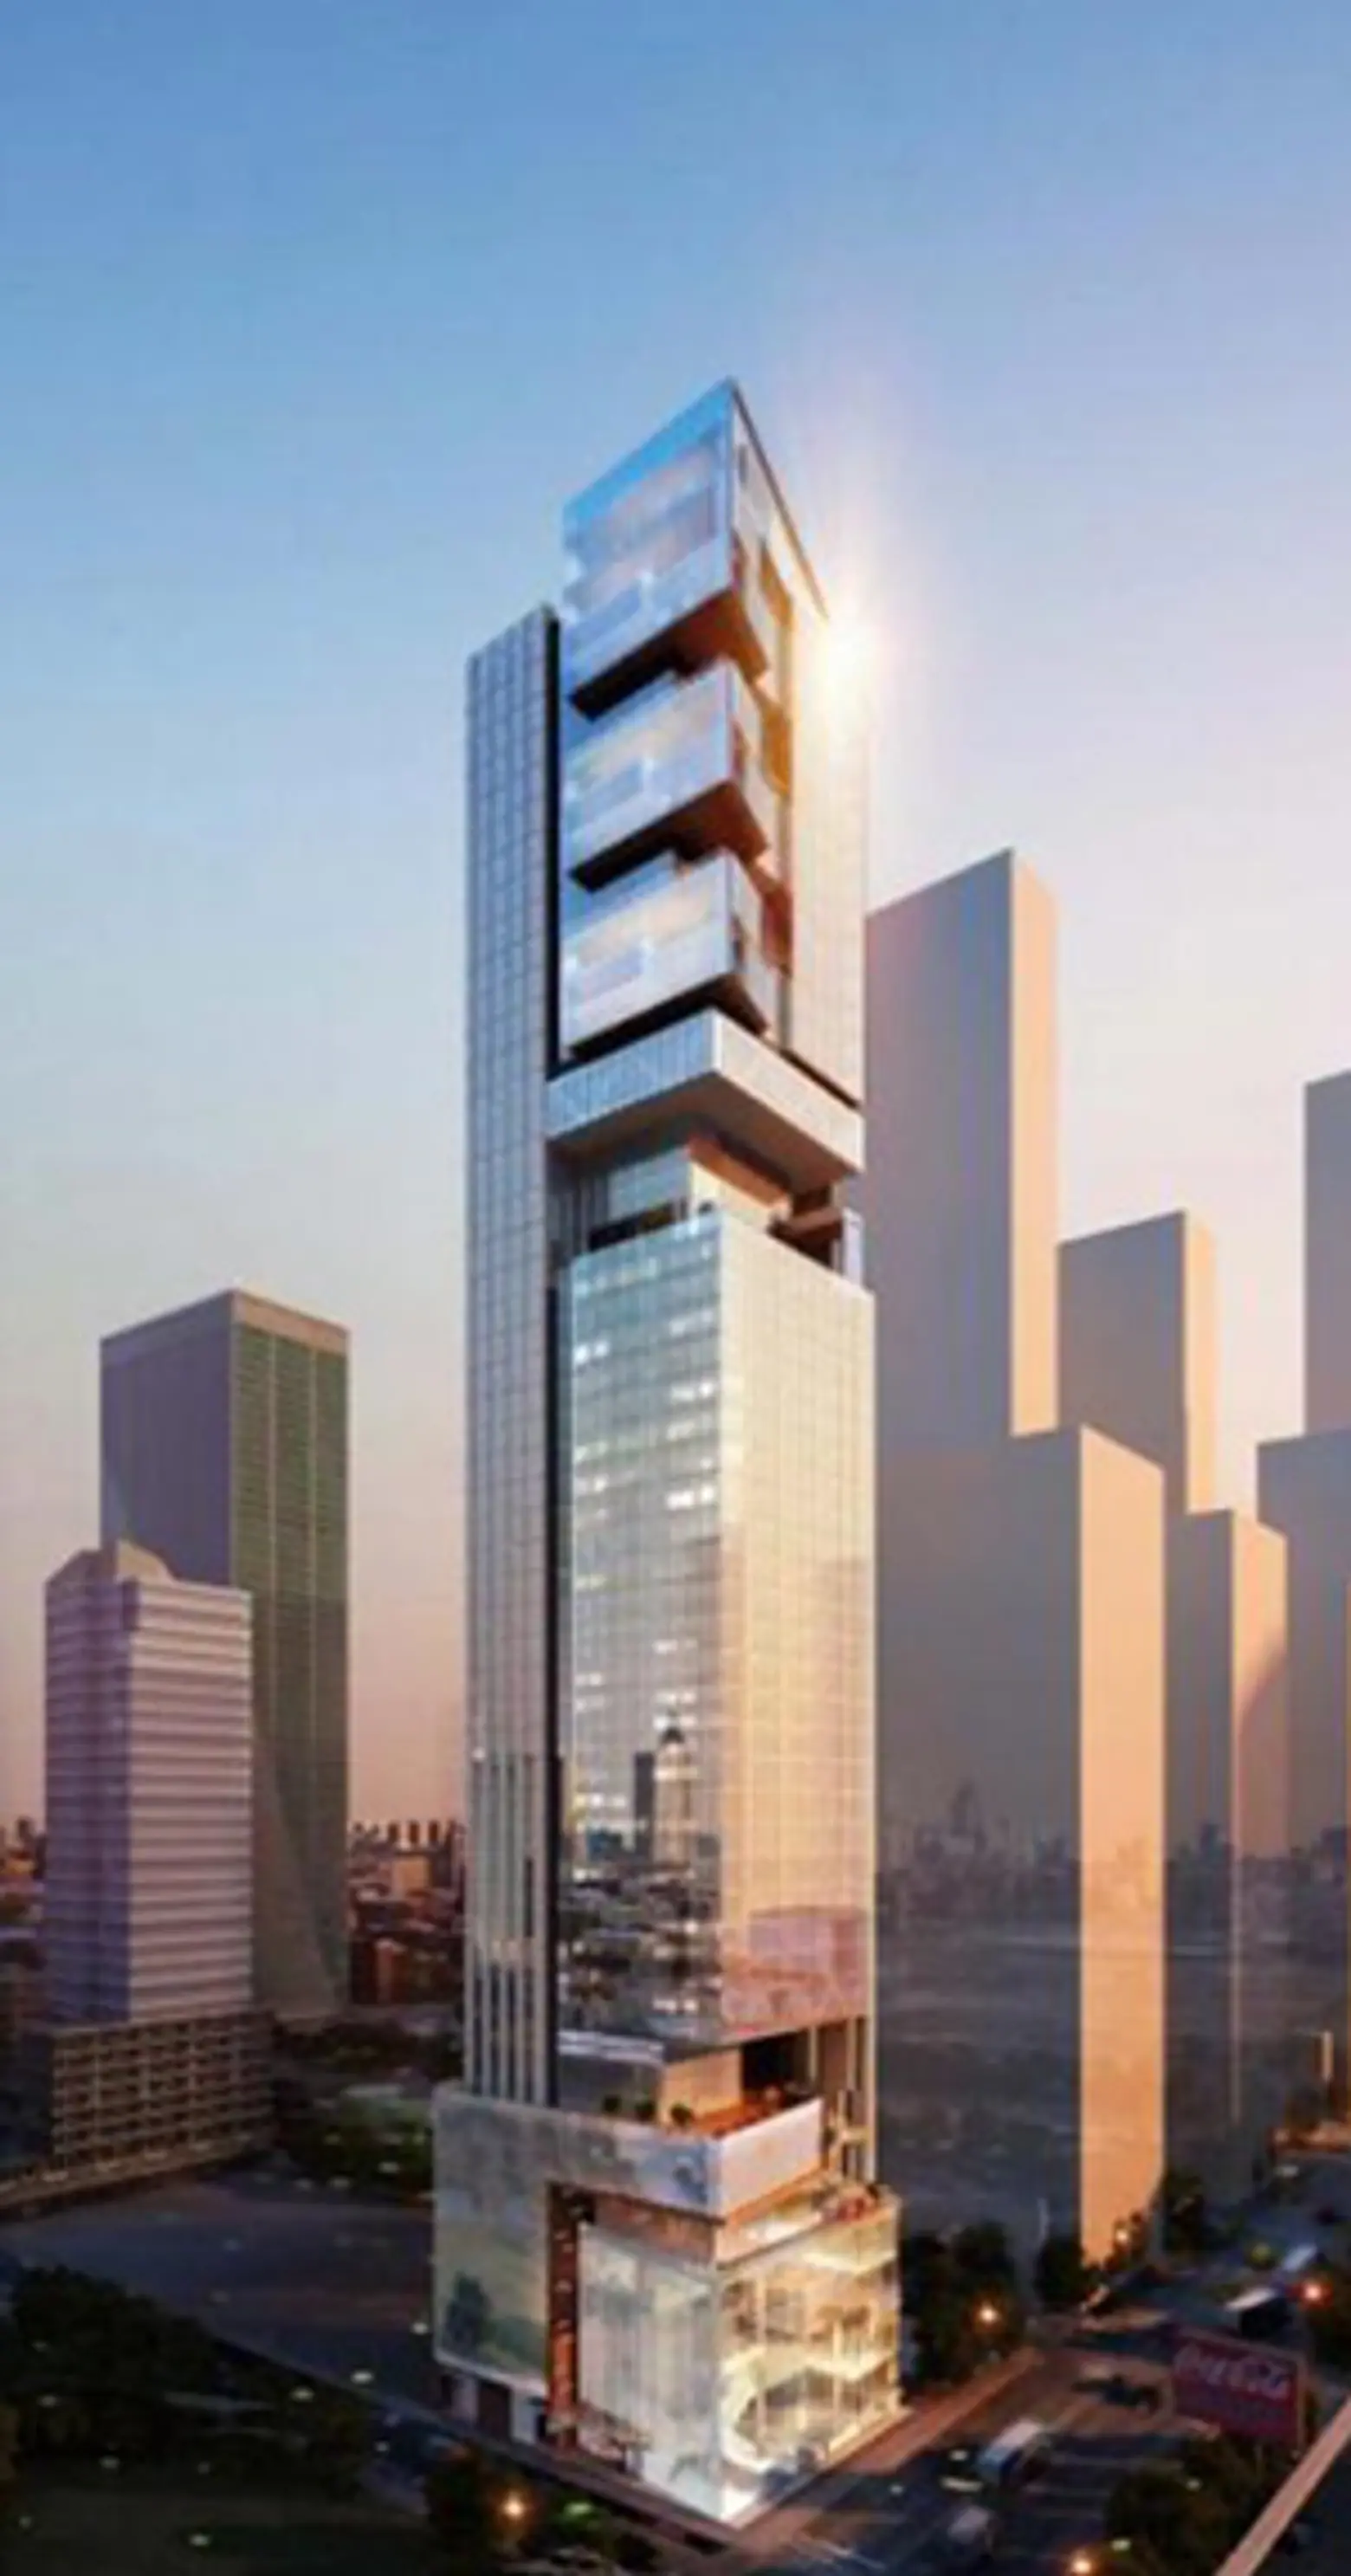 Siras Development, Blackhouse, Hudson Yards, Archilier Architects, NYC tower 